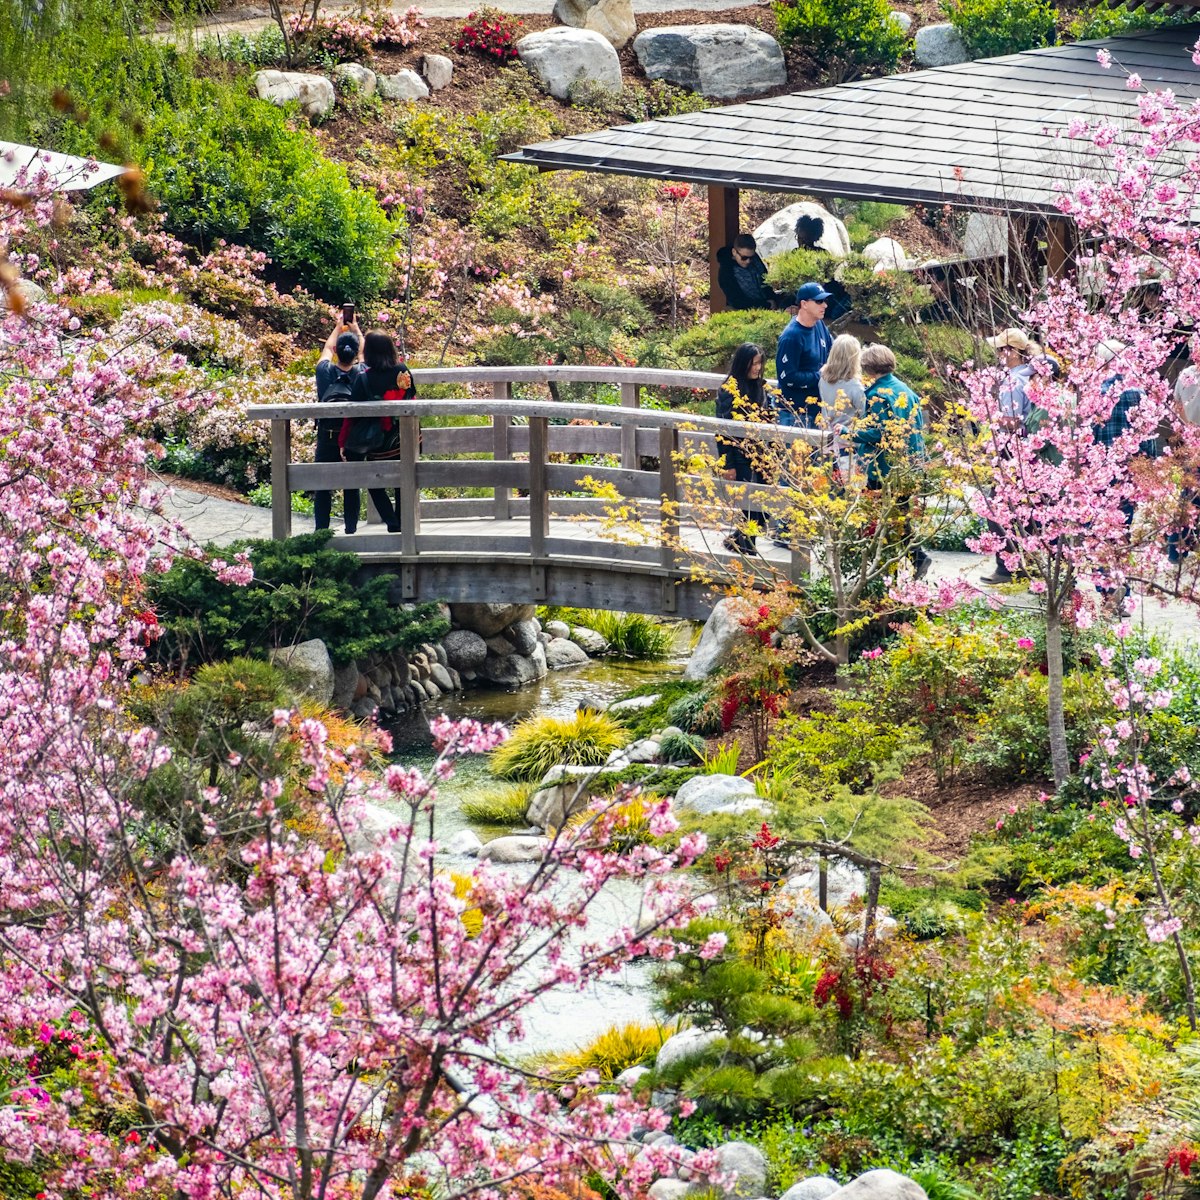 March 19, 2019 San Diego / CA / USA - Landscape in Japanese Friendship Garden during the Cherry Blossom Festival in Balboa Park; Shutterstock ID 1349470580; your: Bridget Brown; gl: 65050; netsuite: Online Editorial; full: POI Image Update